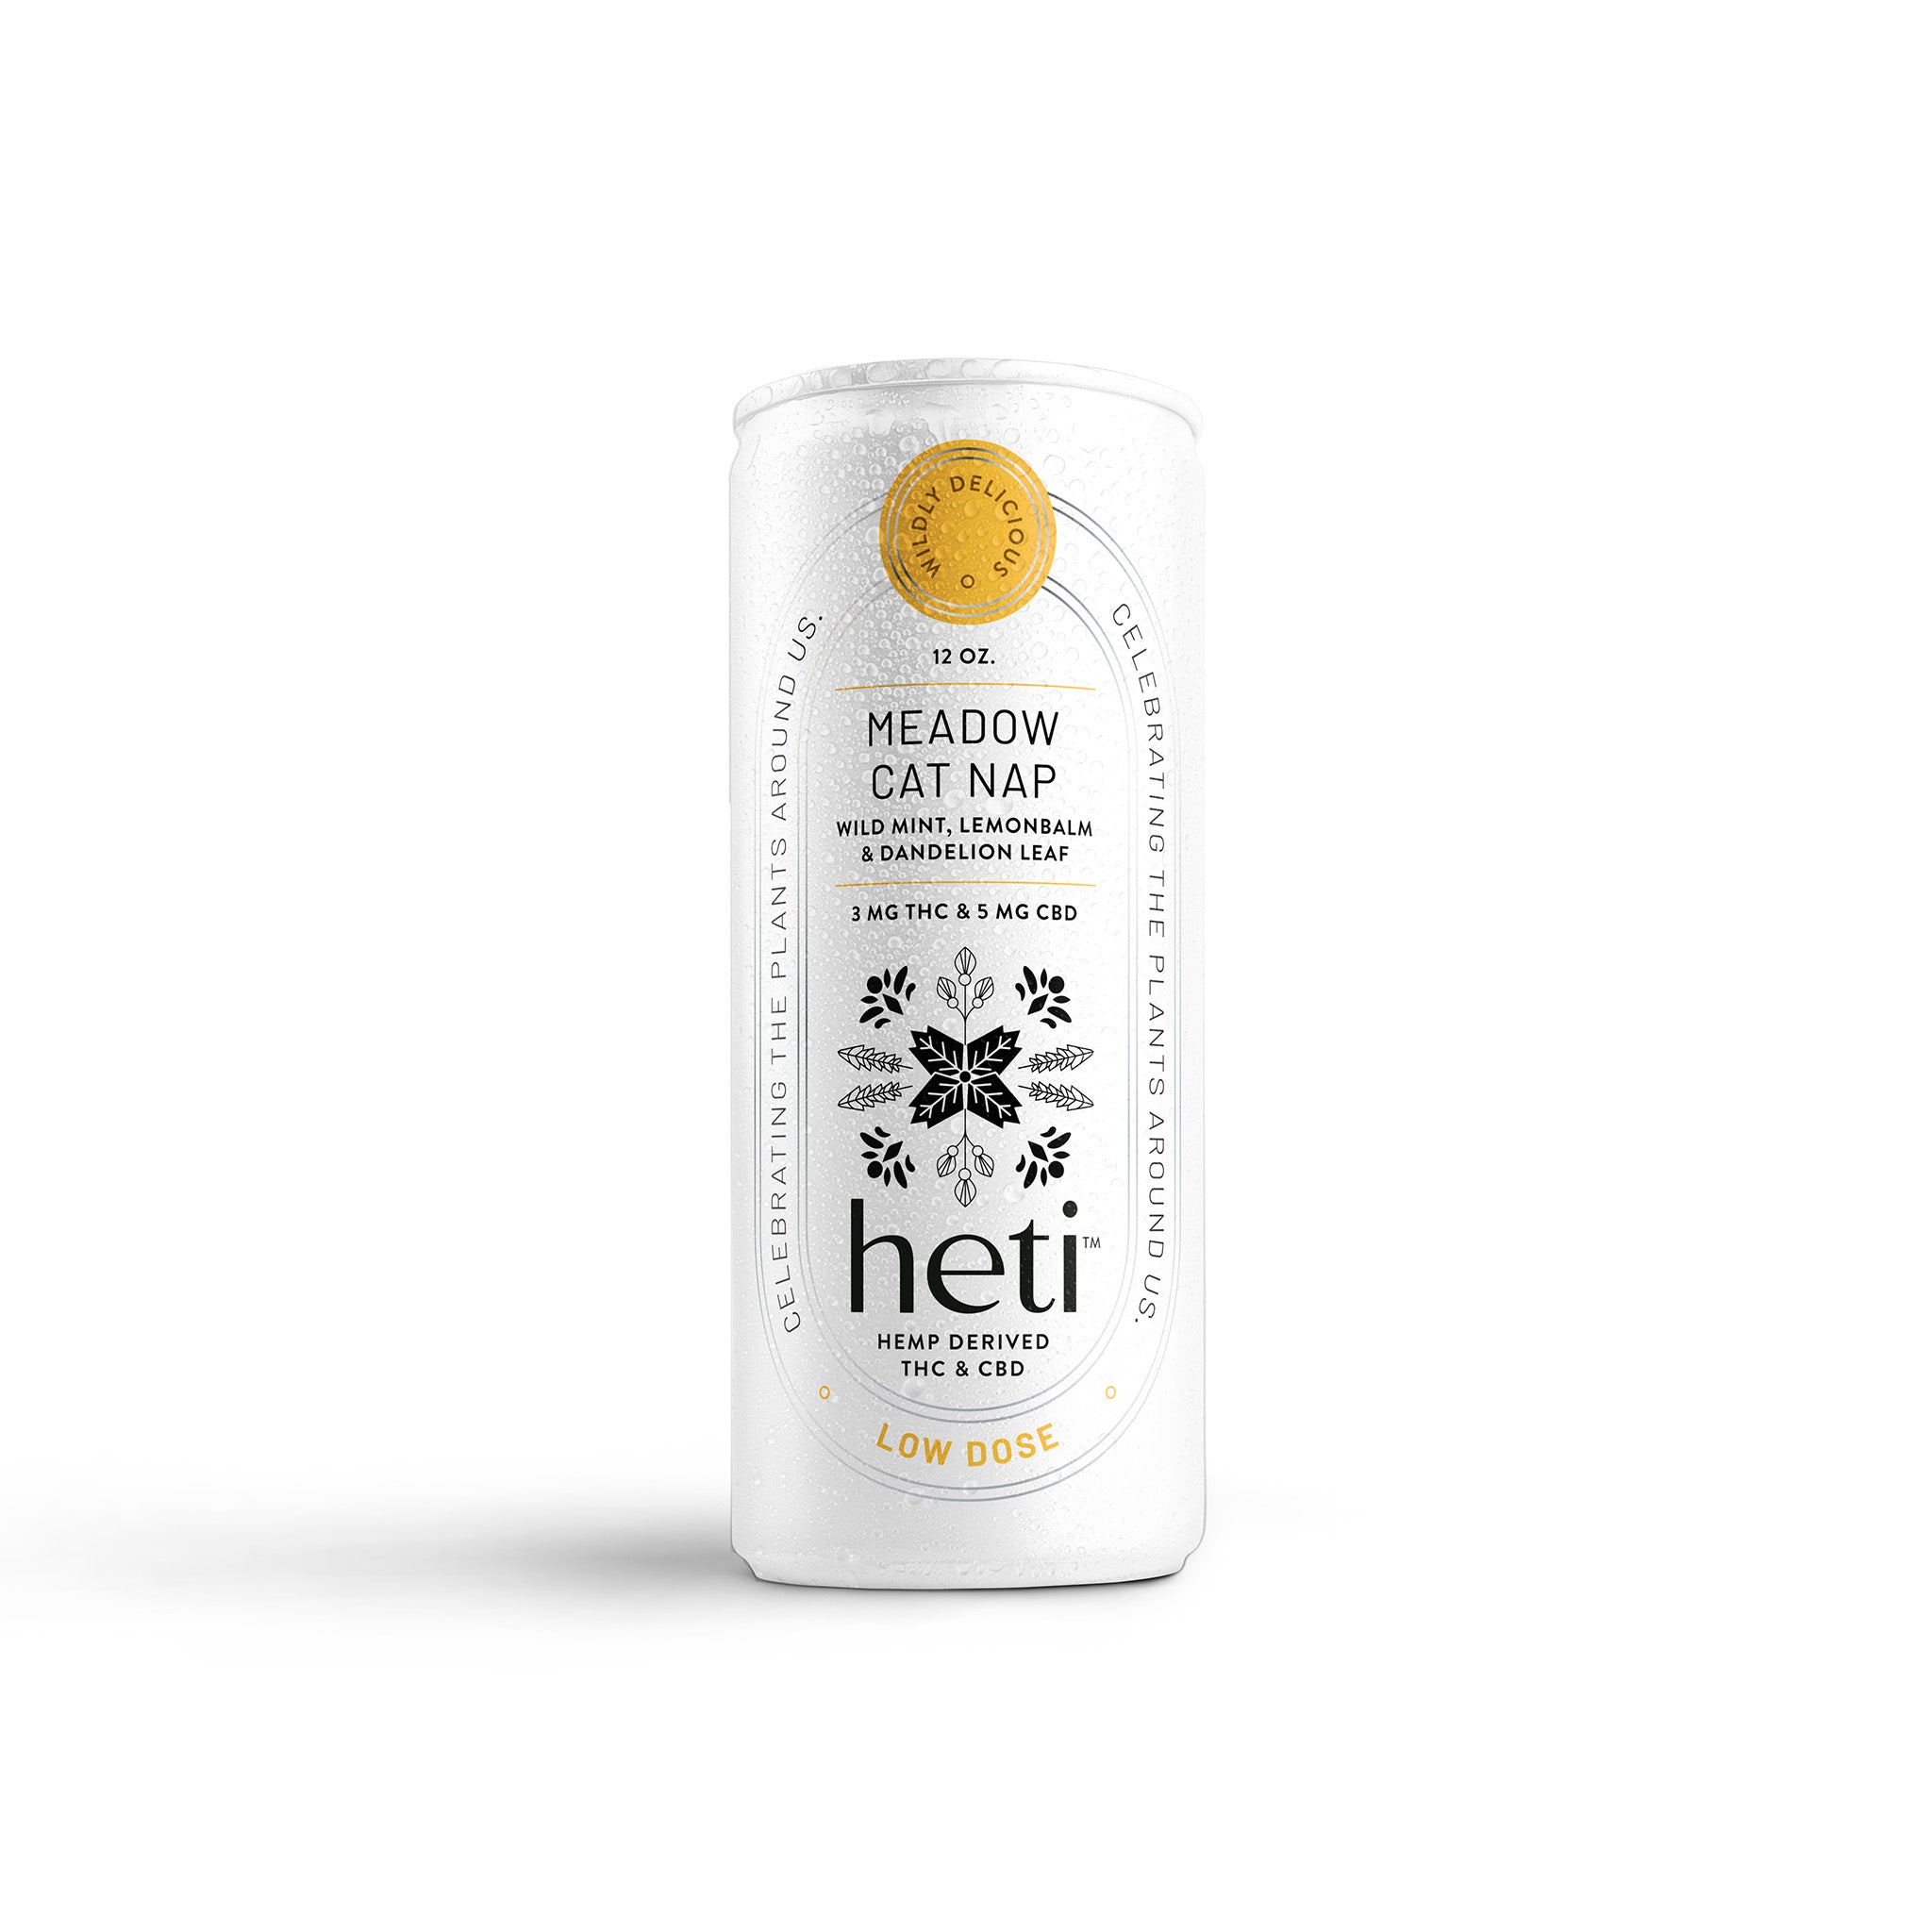 Heti THC beverage can in flavor Meadow Cat Nap which is dandelion leaf, lemon balm and wild mint